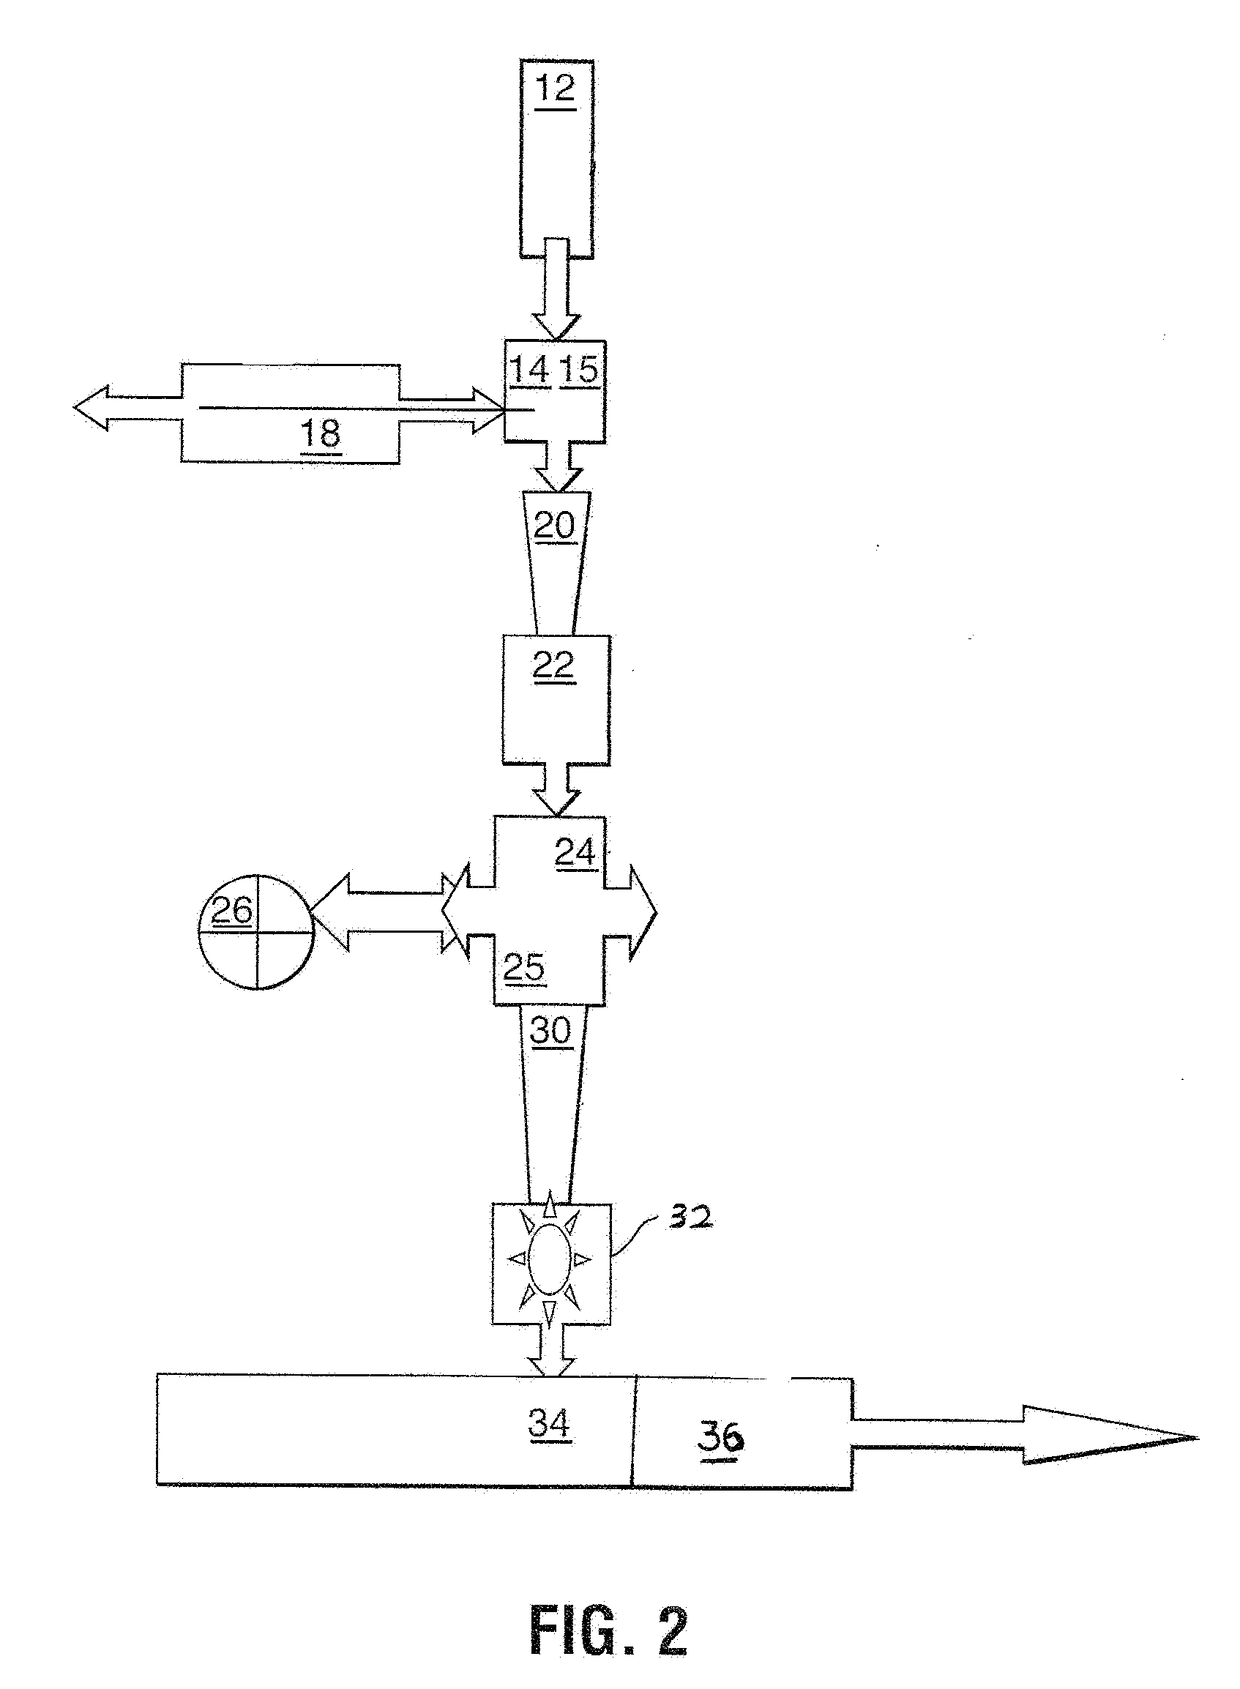 Process for producing hydro-mulch composition from muck